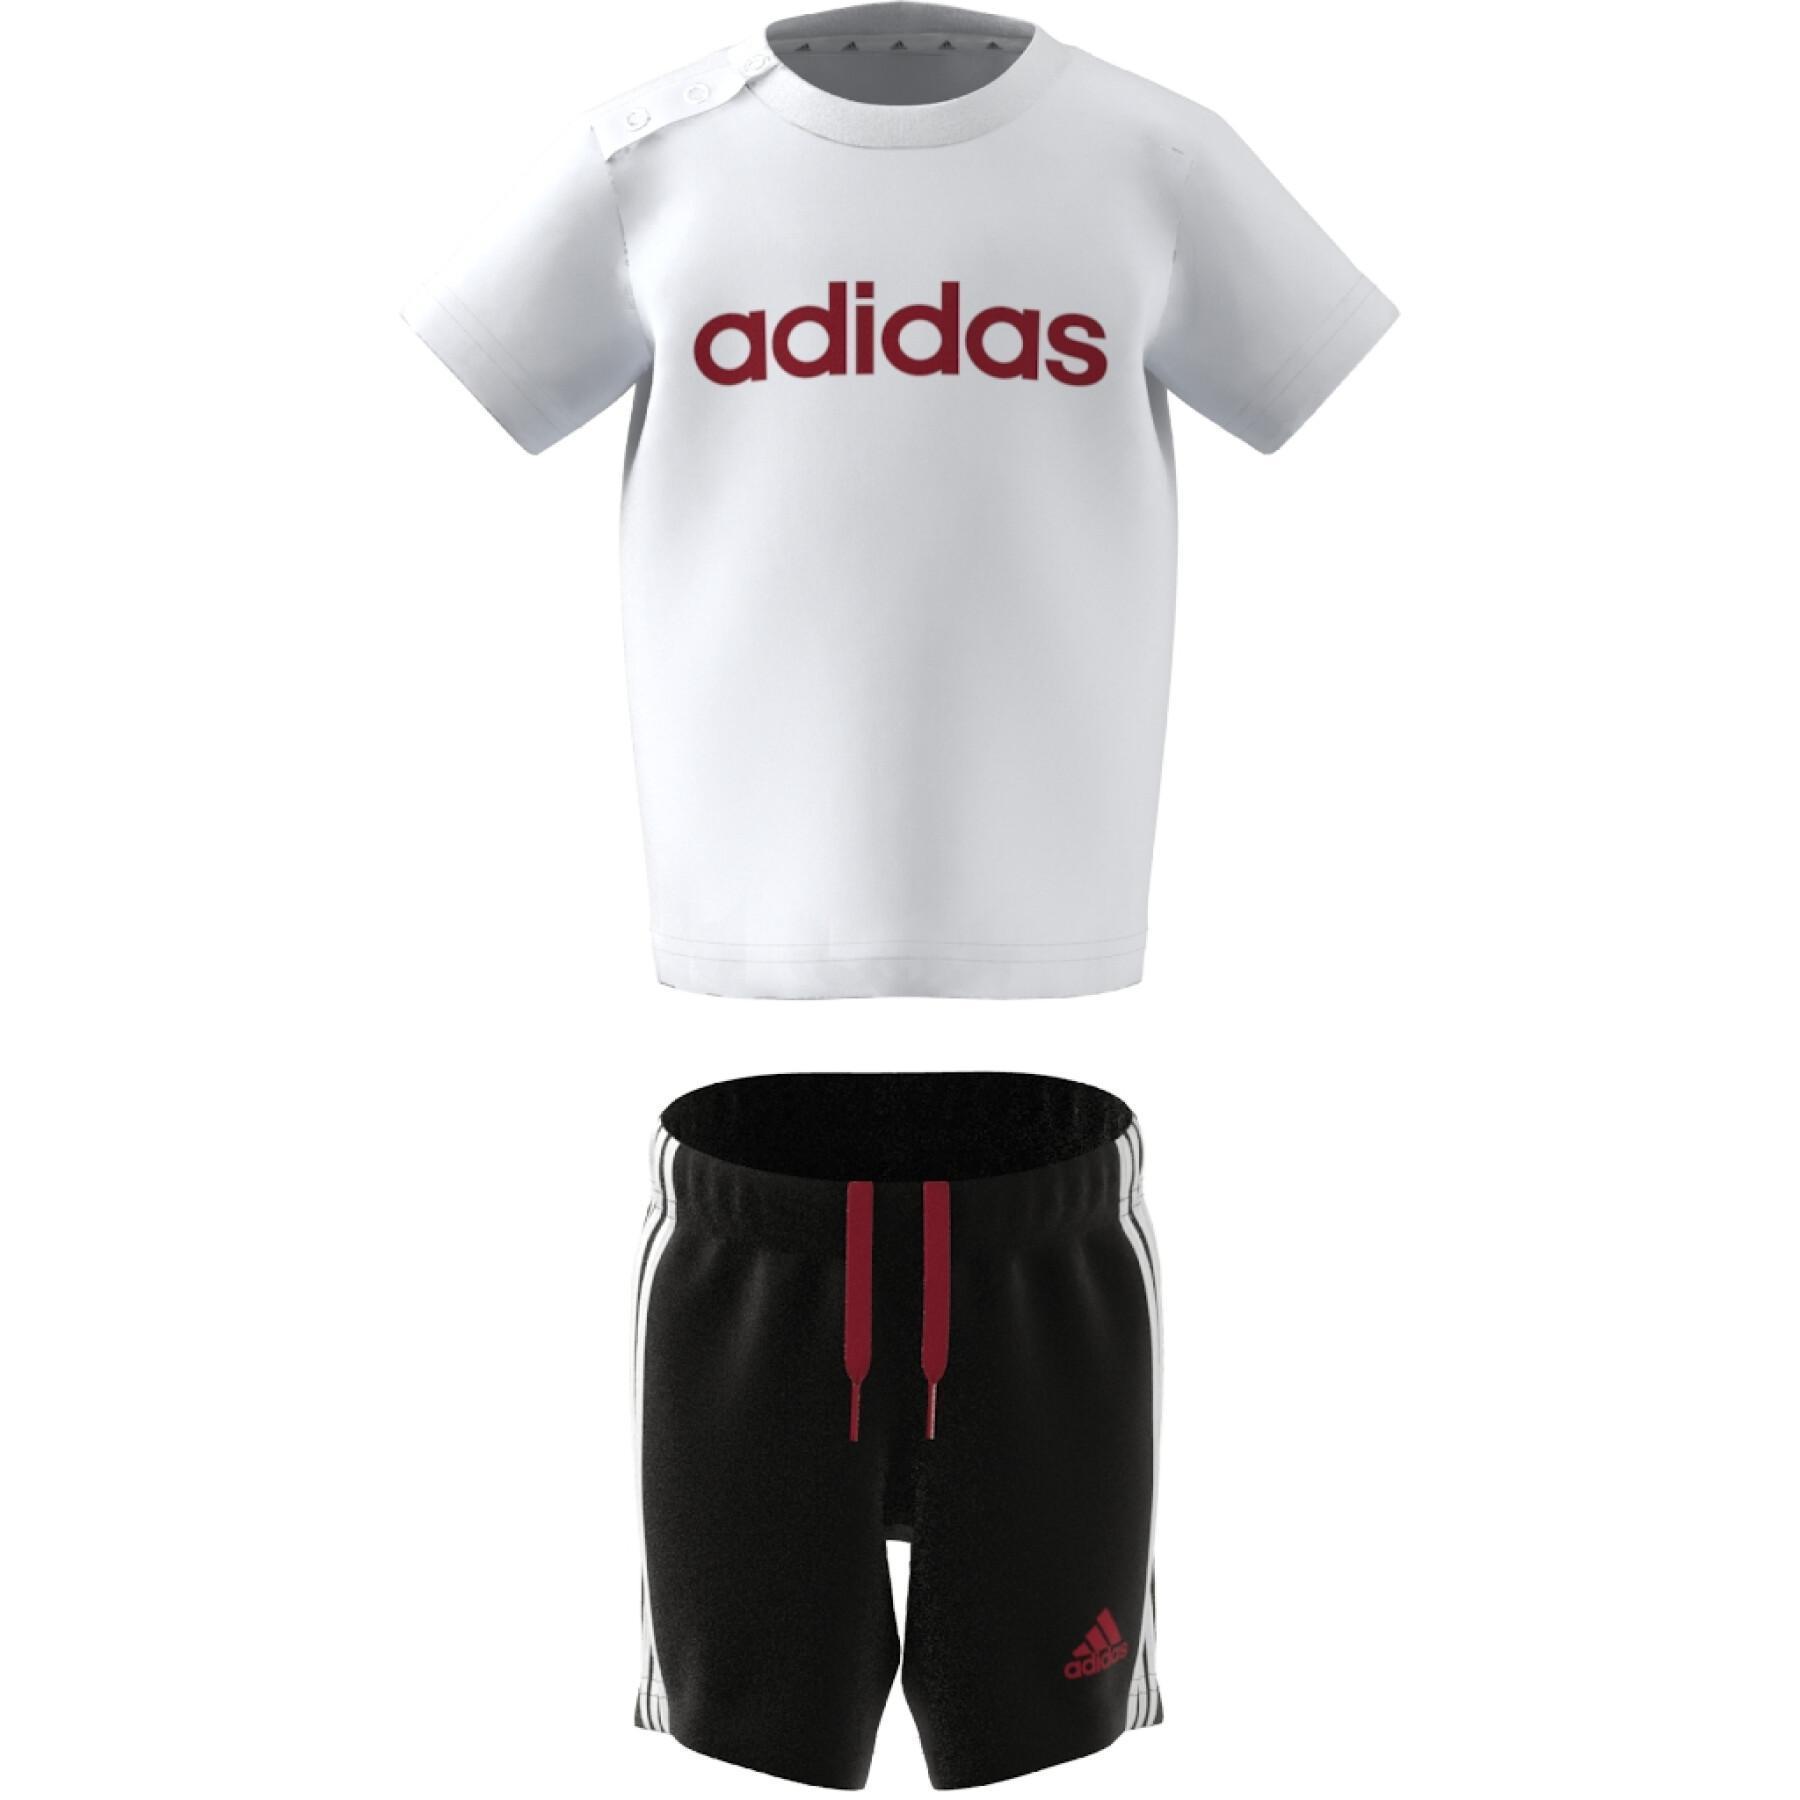 Organic cotton t-shirt and - Lifestyle Brands adidas Lineage 3-Stripes shorts Essentials - set - adidas